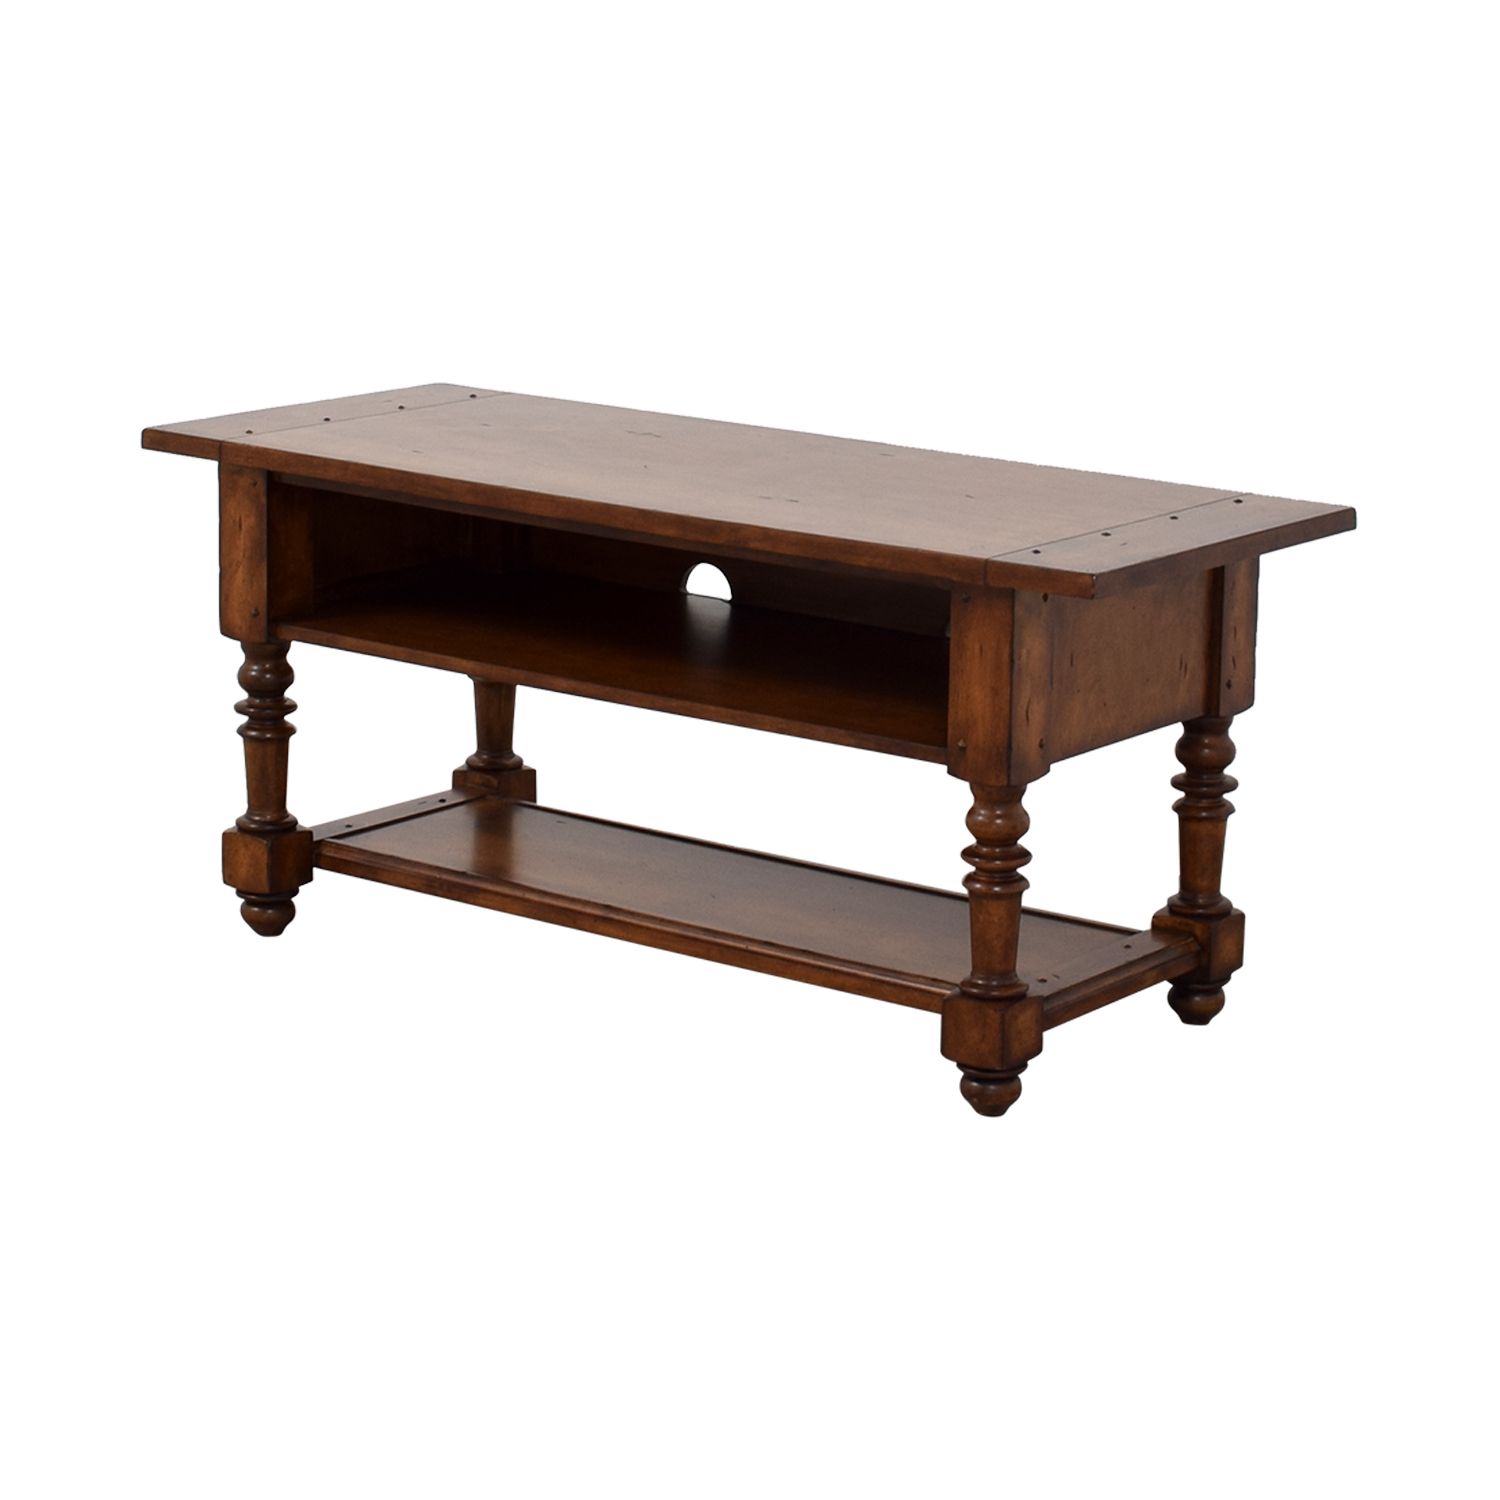 [%90% Off – Pottery Barn Pottery Barn Como Wood Tv Stand / Storage Regarding Well Known Como Tv Stands|como Tv Stands Within Preferred 90% Off – Pottery Barn Pottery Barn Como Wood Tv Stand / Storage|preferred Como Tv Stands With 90% Off – Pottery Barn Pottery Barn Como Wood Tv Stand / Storage|current 90% Off – Pottery Barn Pottery Barn Como Wood Tv Stand / Storage Regarding Como Tv Stands%] (View 8 of 20)